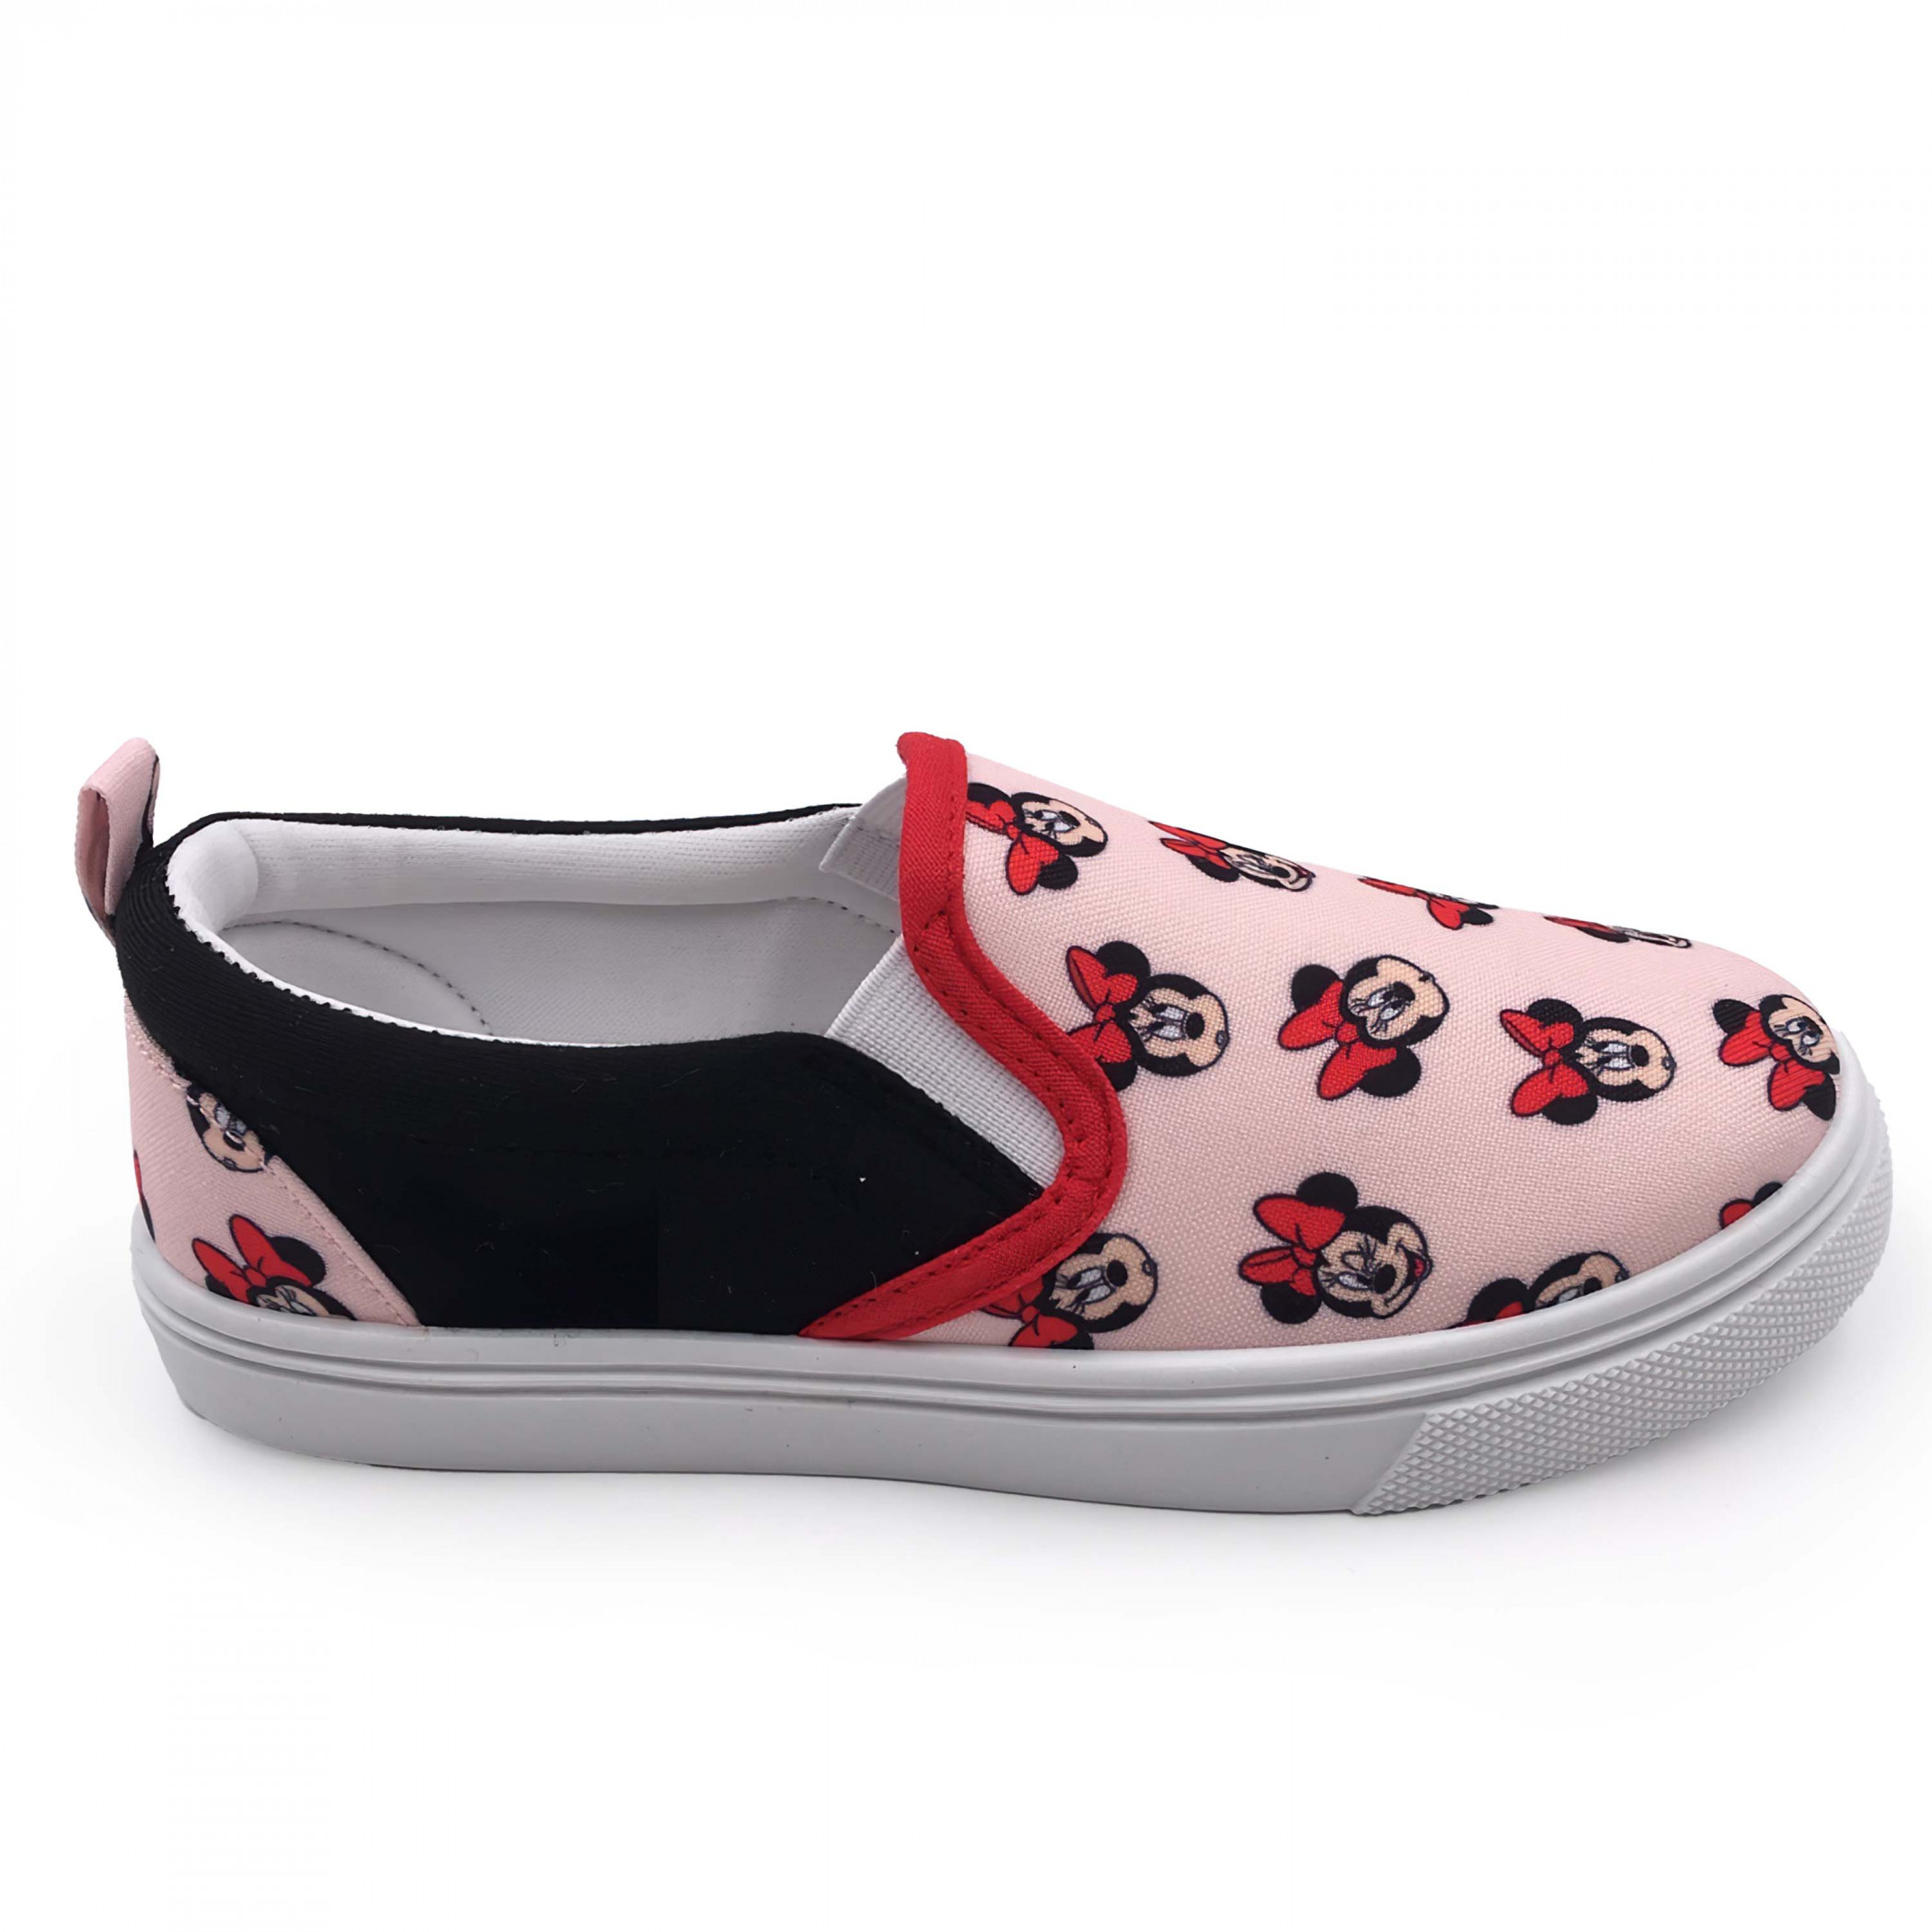 Minnie Mouse Expressions Girl's Slip-On Shoes